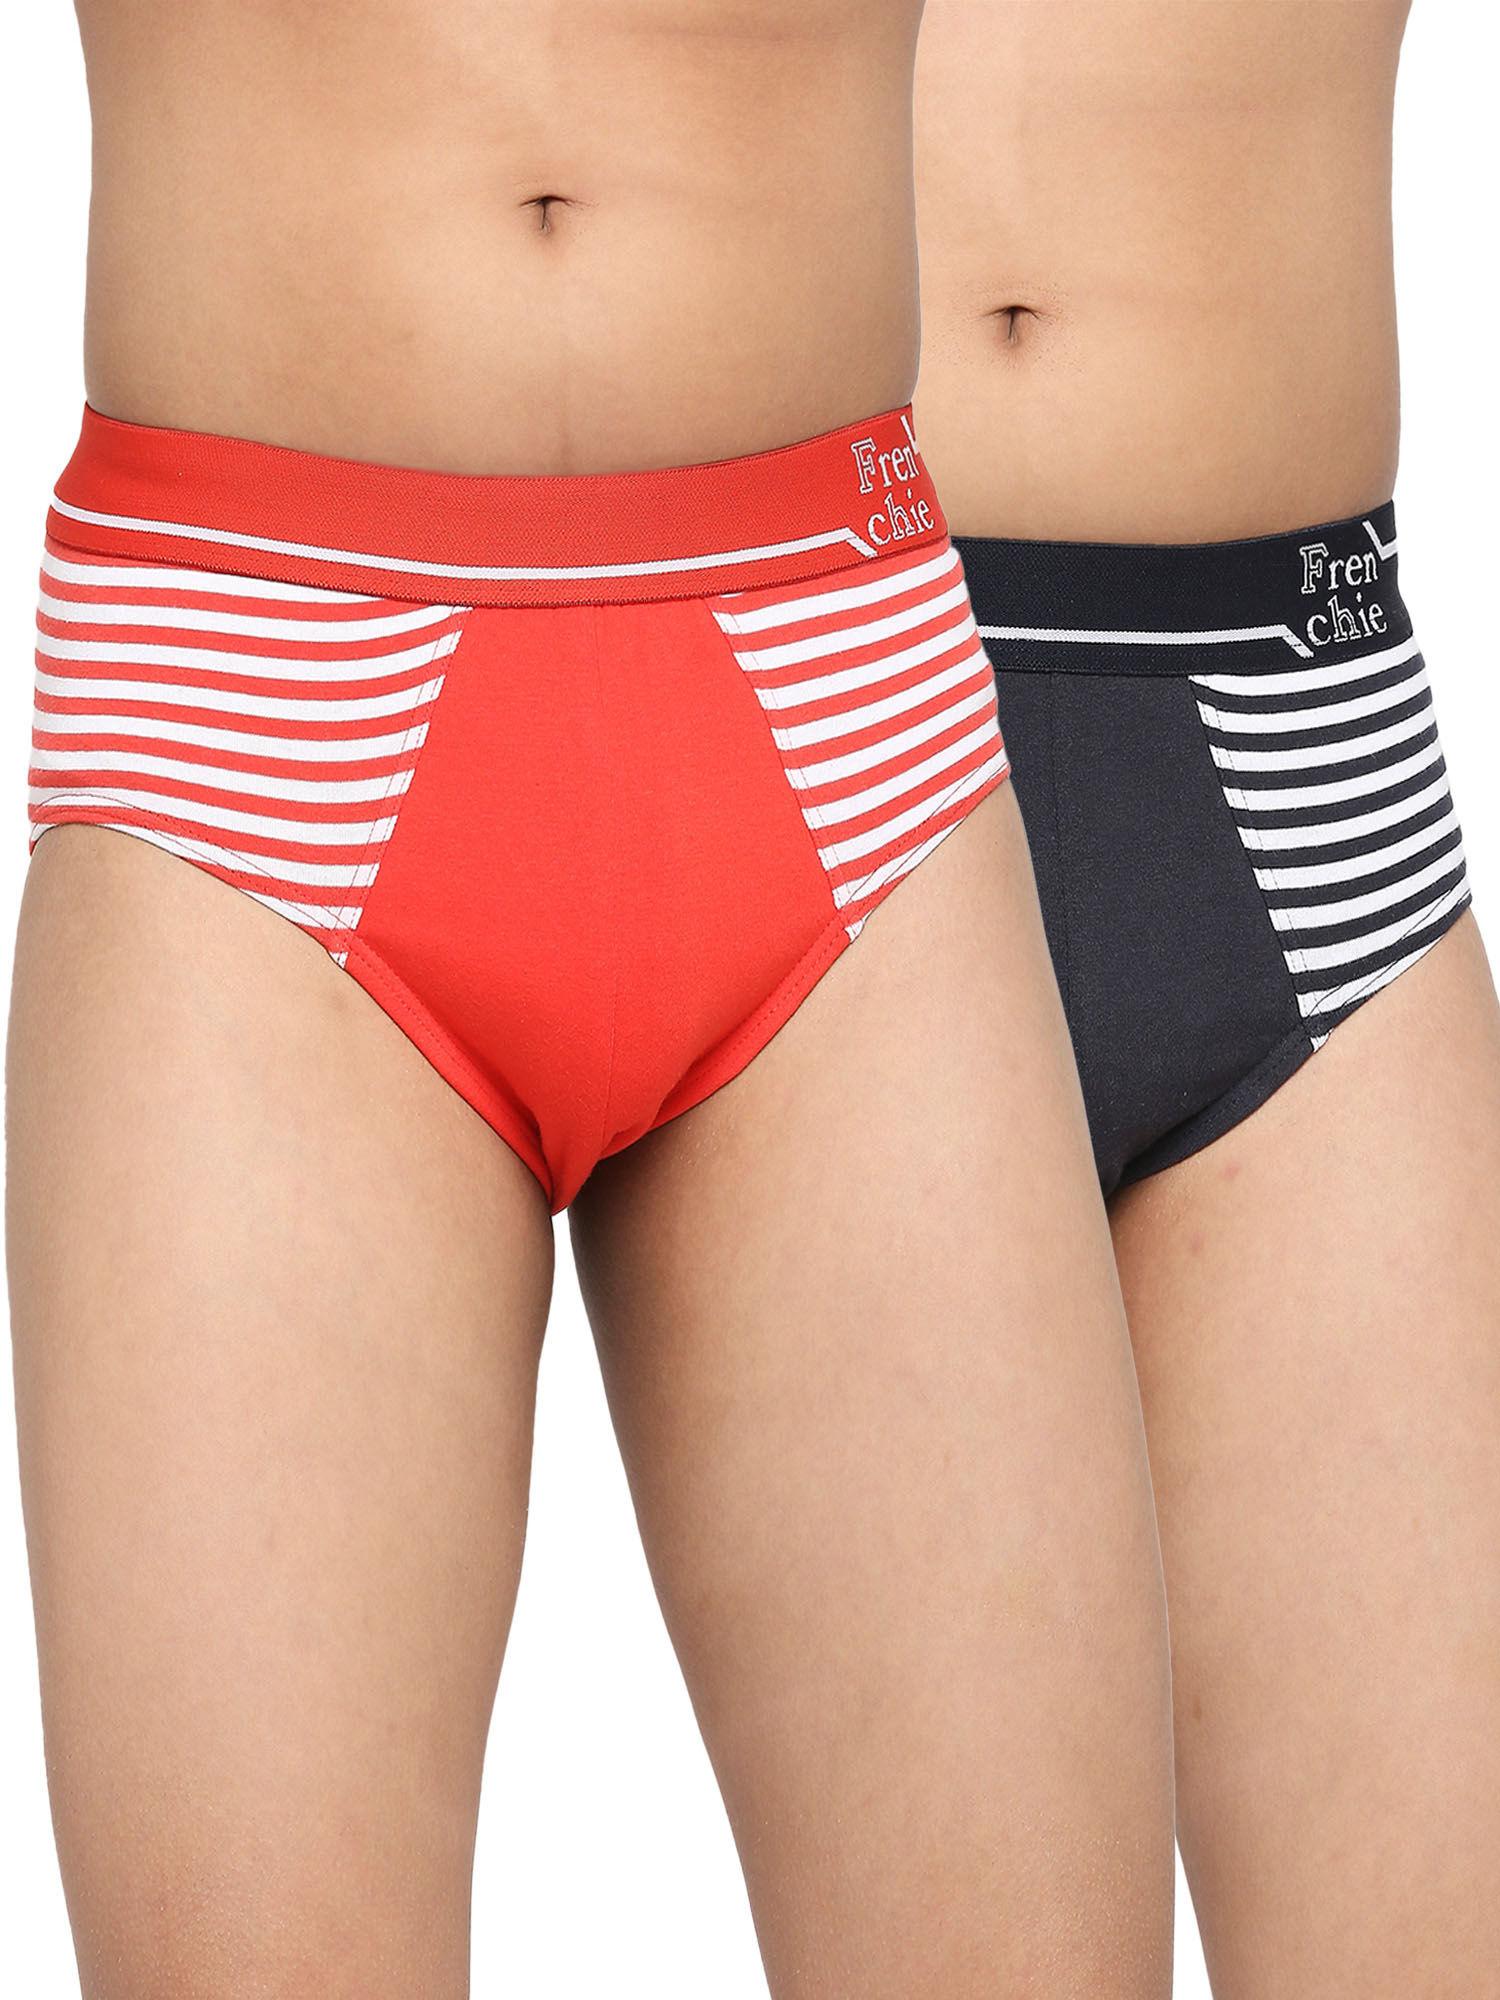 teenagers cotton brief navy blue and red (pack of 2)